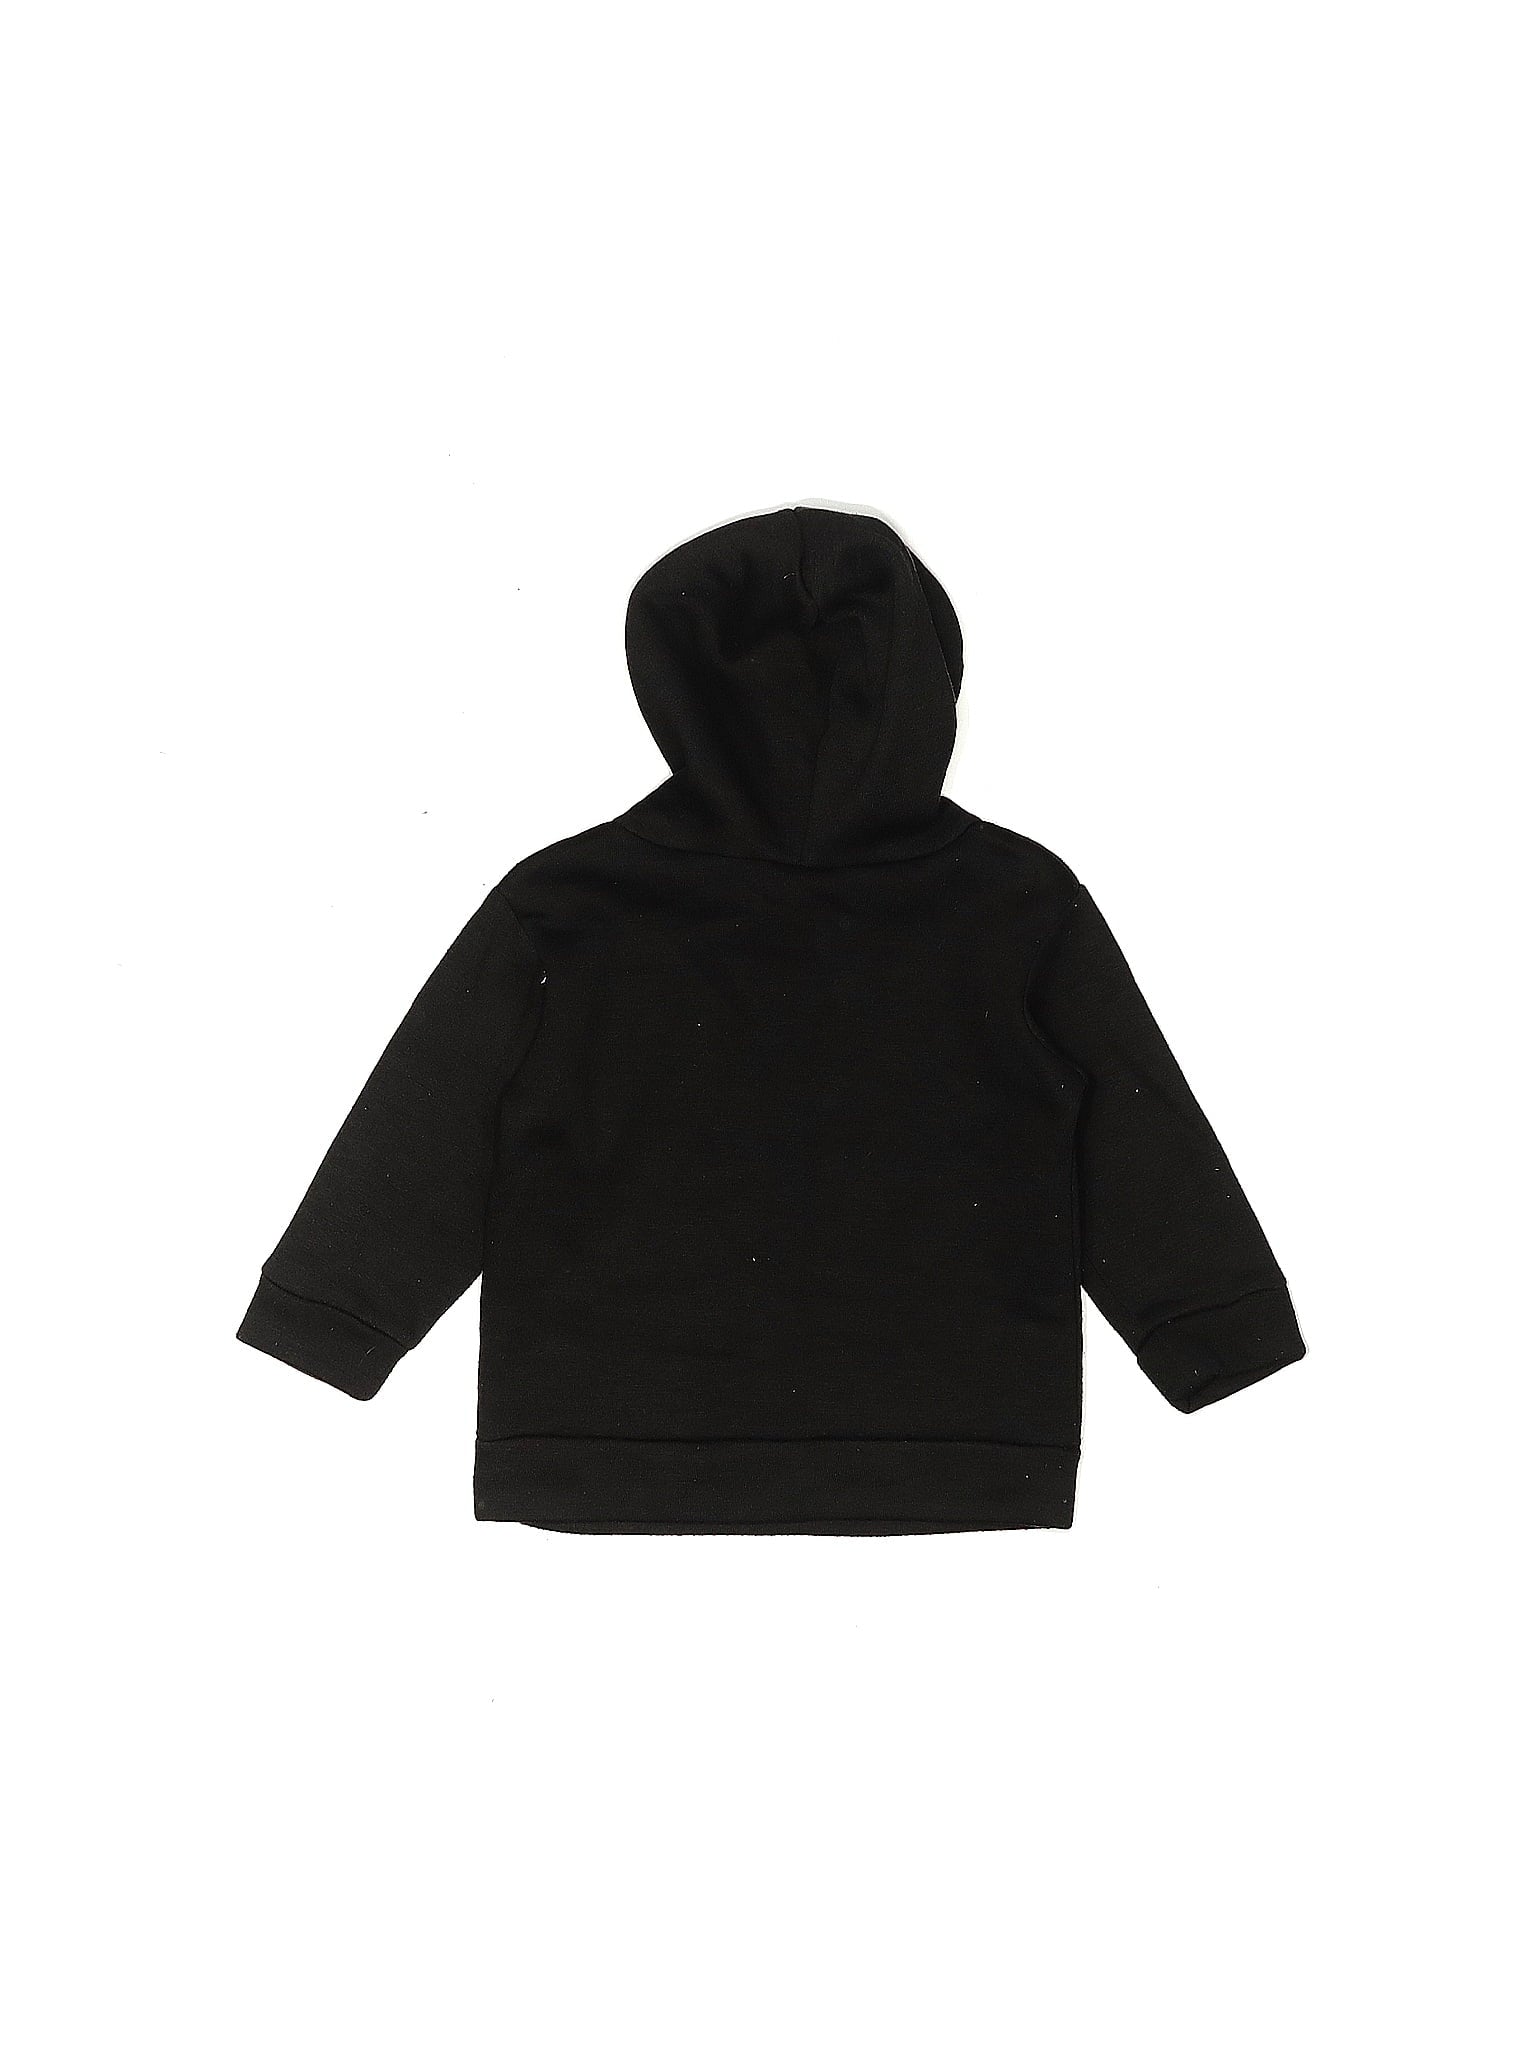 Pullover Hoodie size - 2T